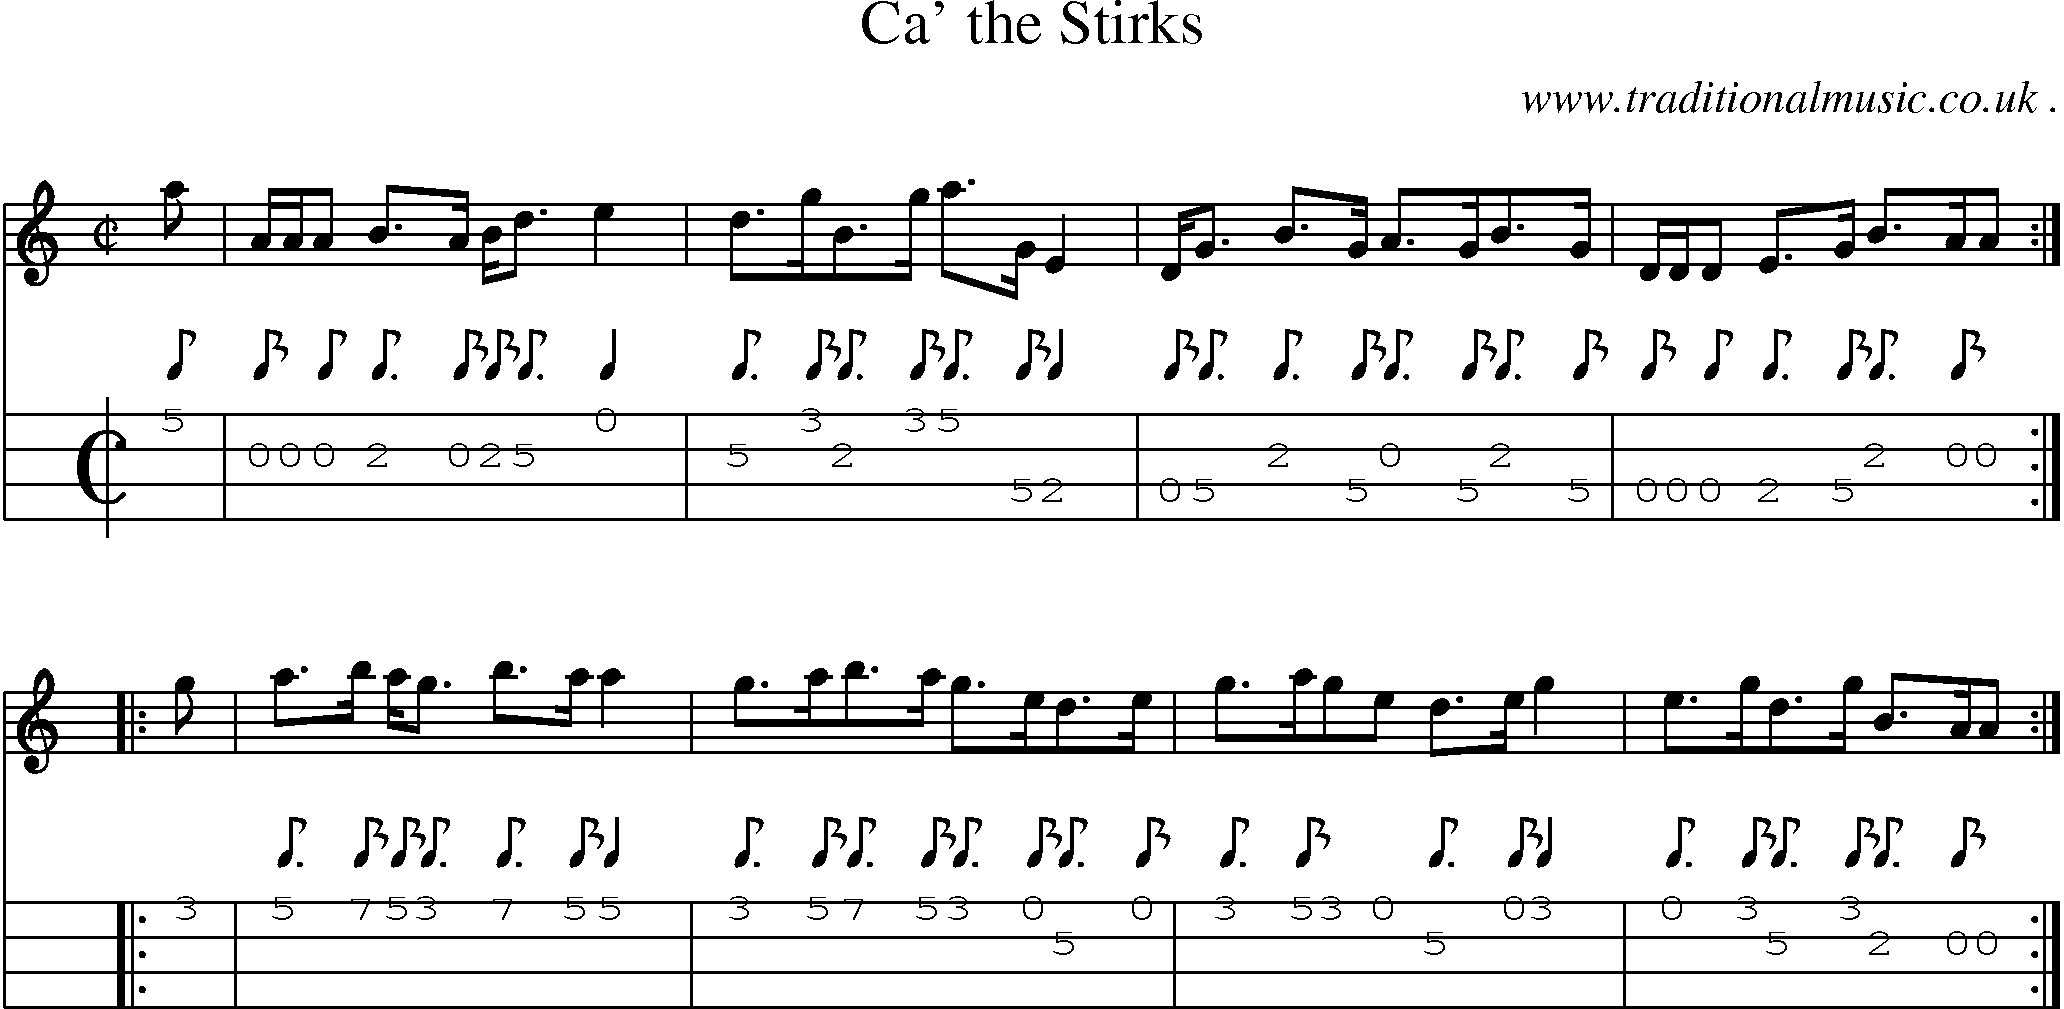 Sheet-music  score, Chords and Mandolin Tabs for Ca The Stirks